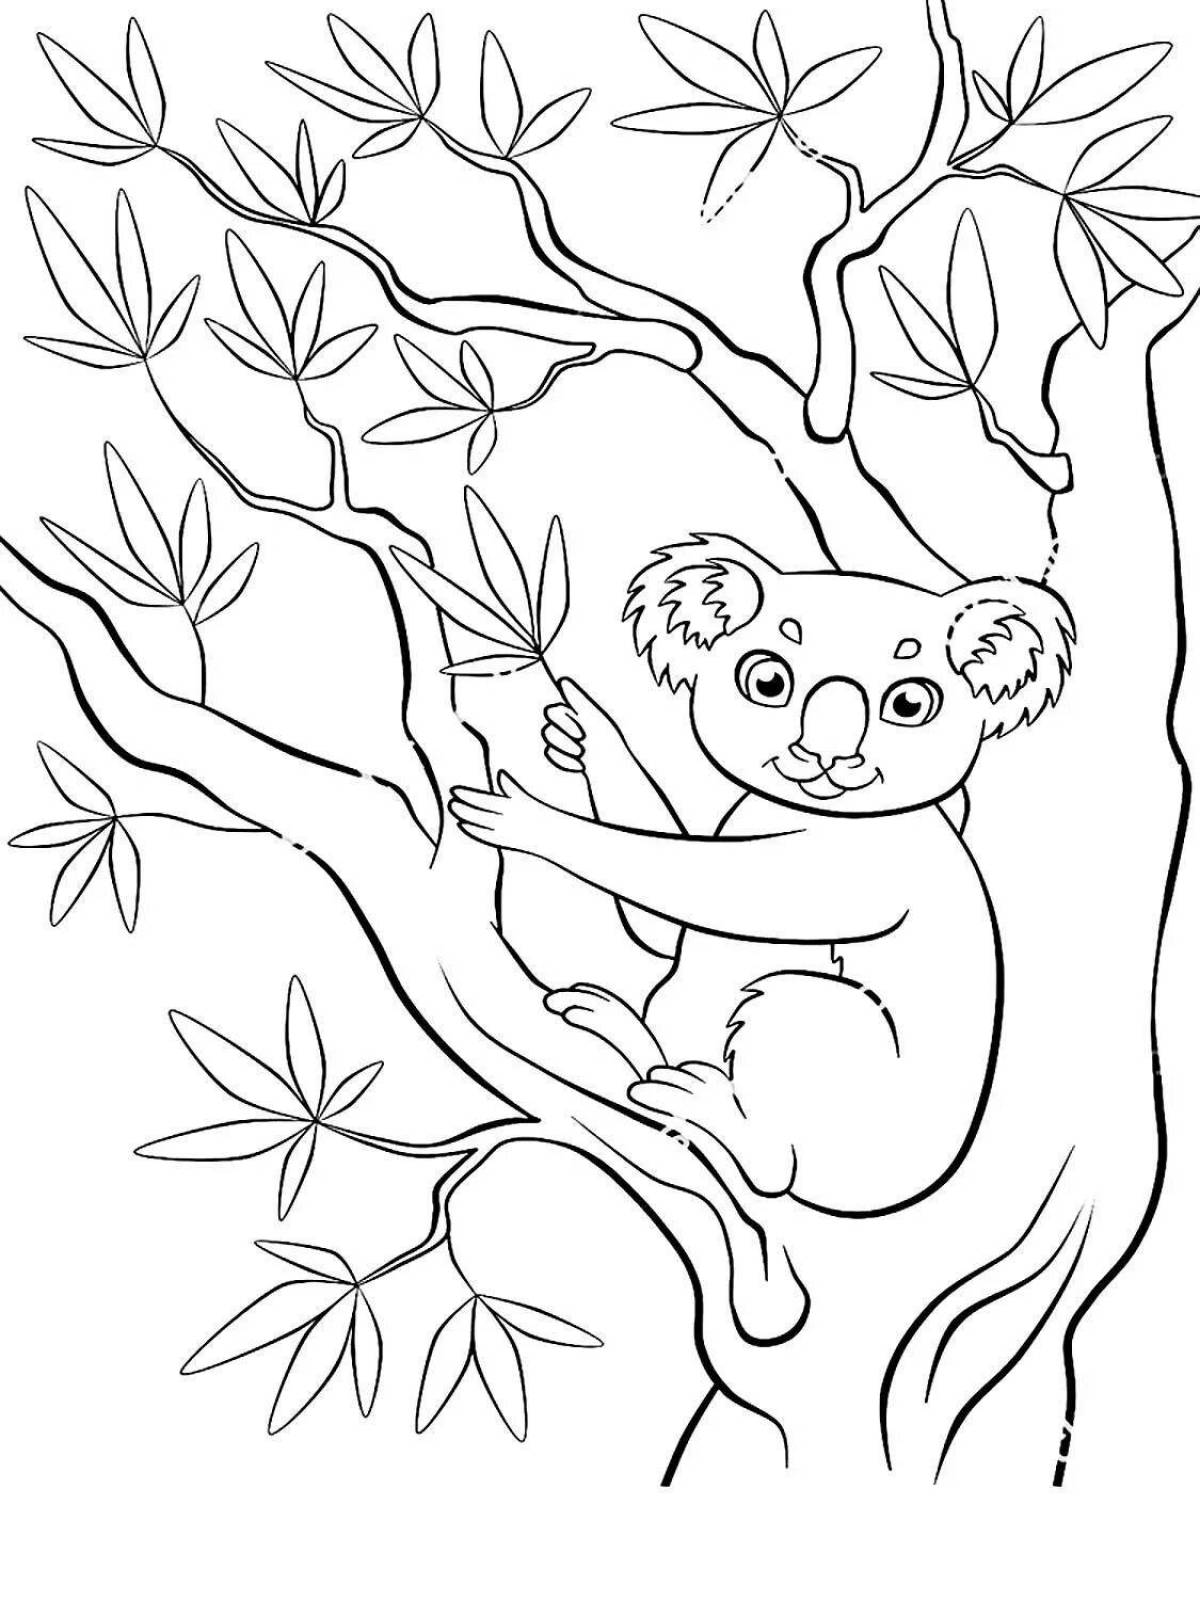 Great eucalyptus tree coloring page